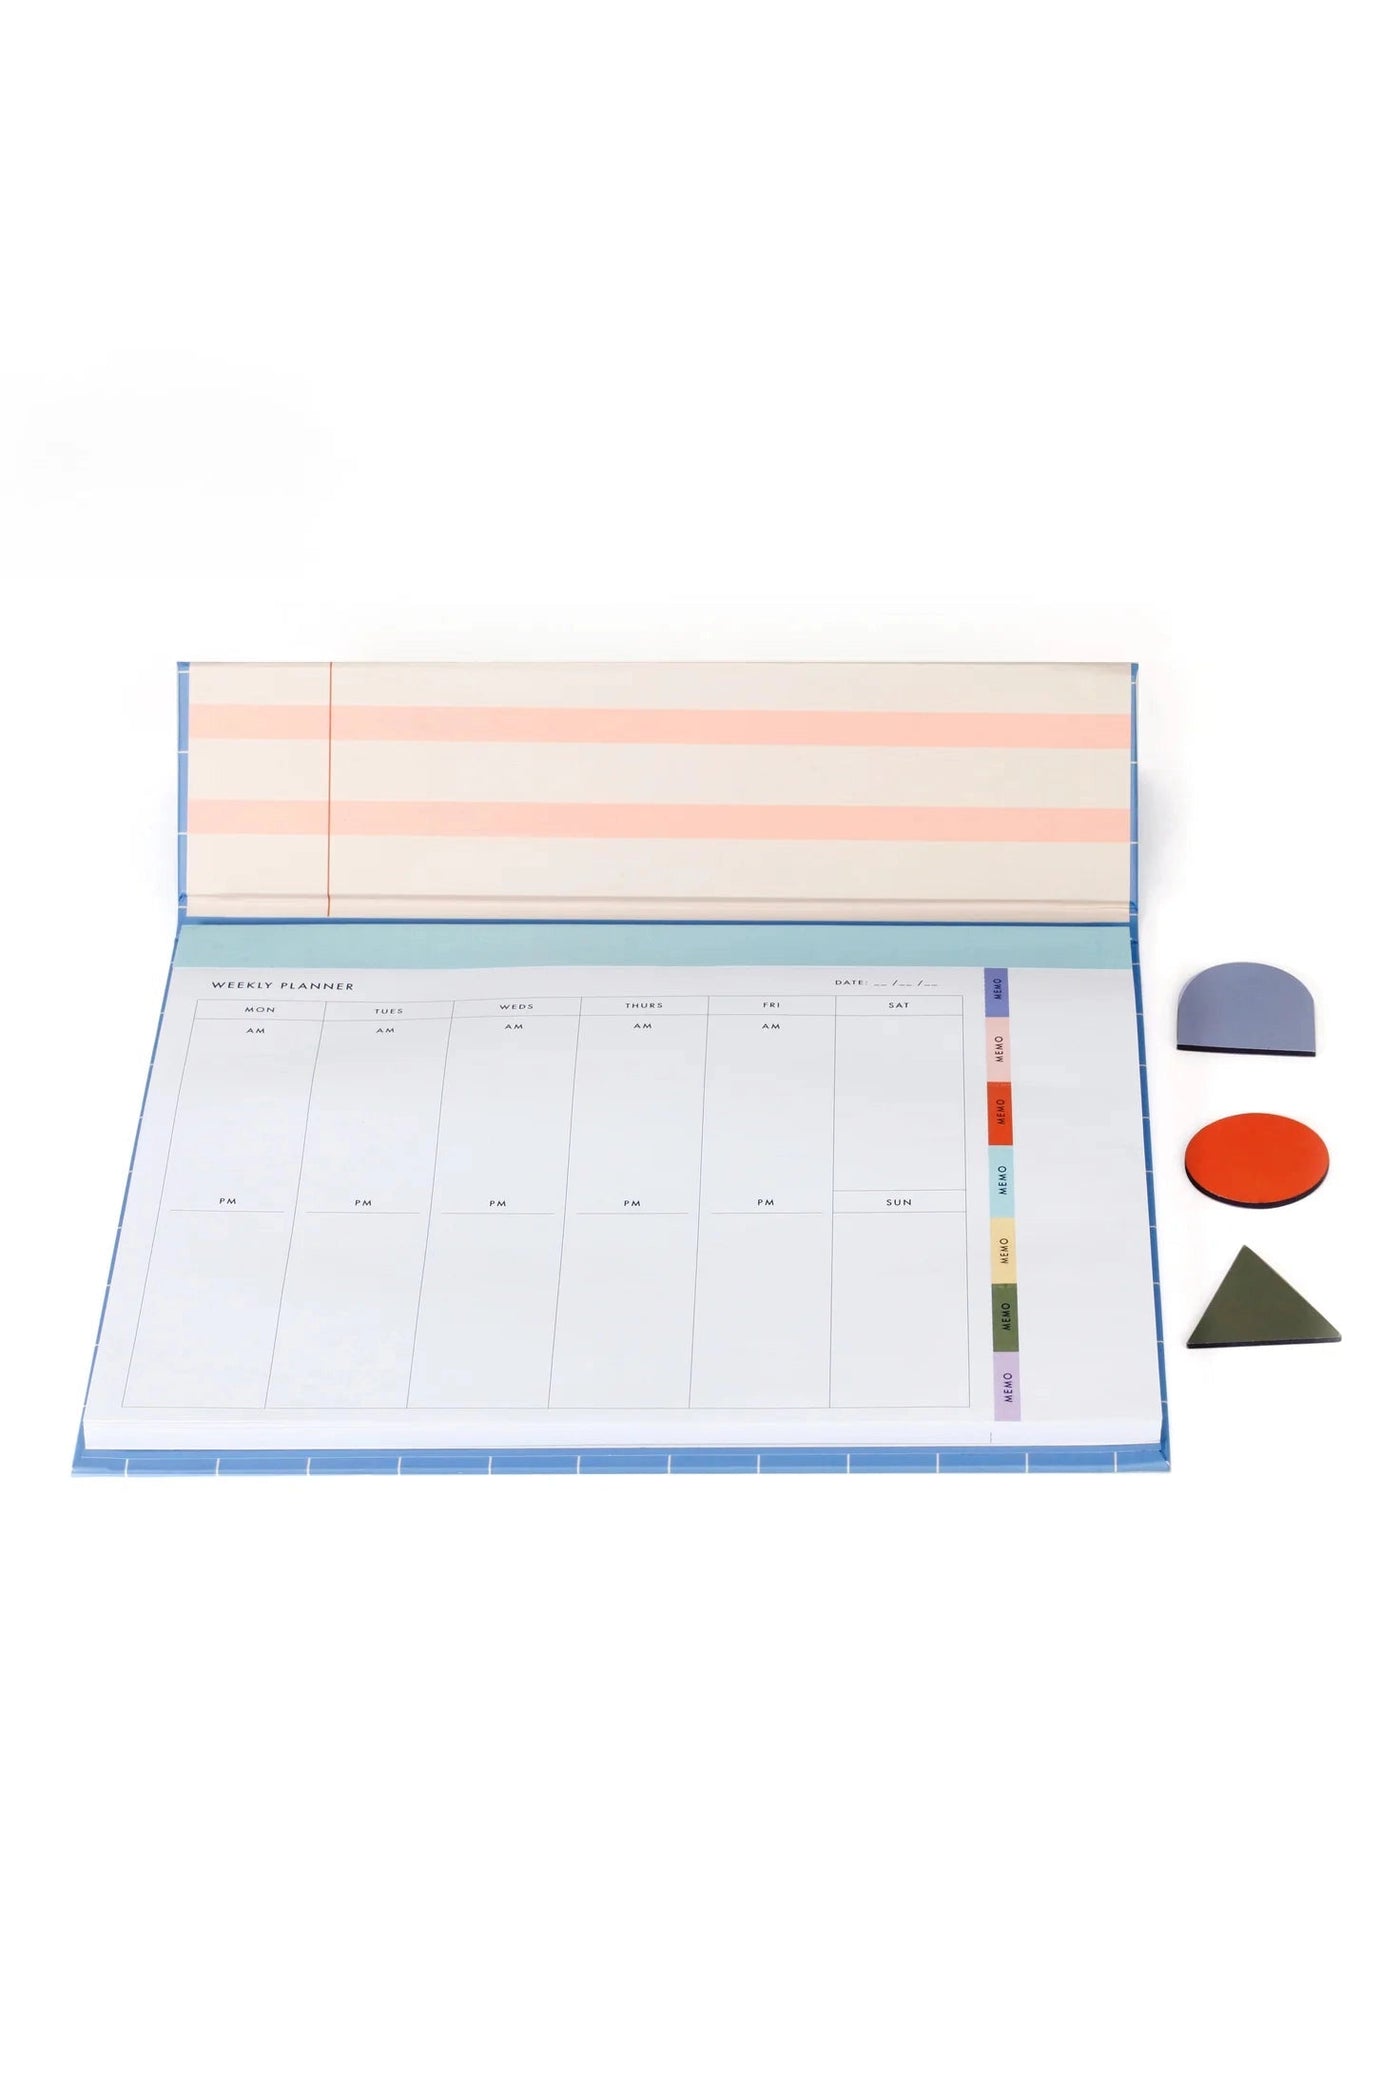 Kikkerland Magnetic Weekly Desk Planner-Homeware-Ohh! By Gum - Shop Sustainable